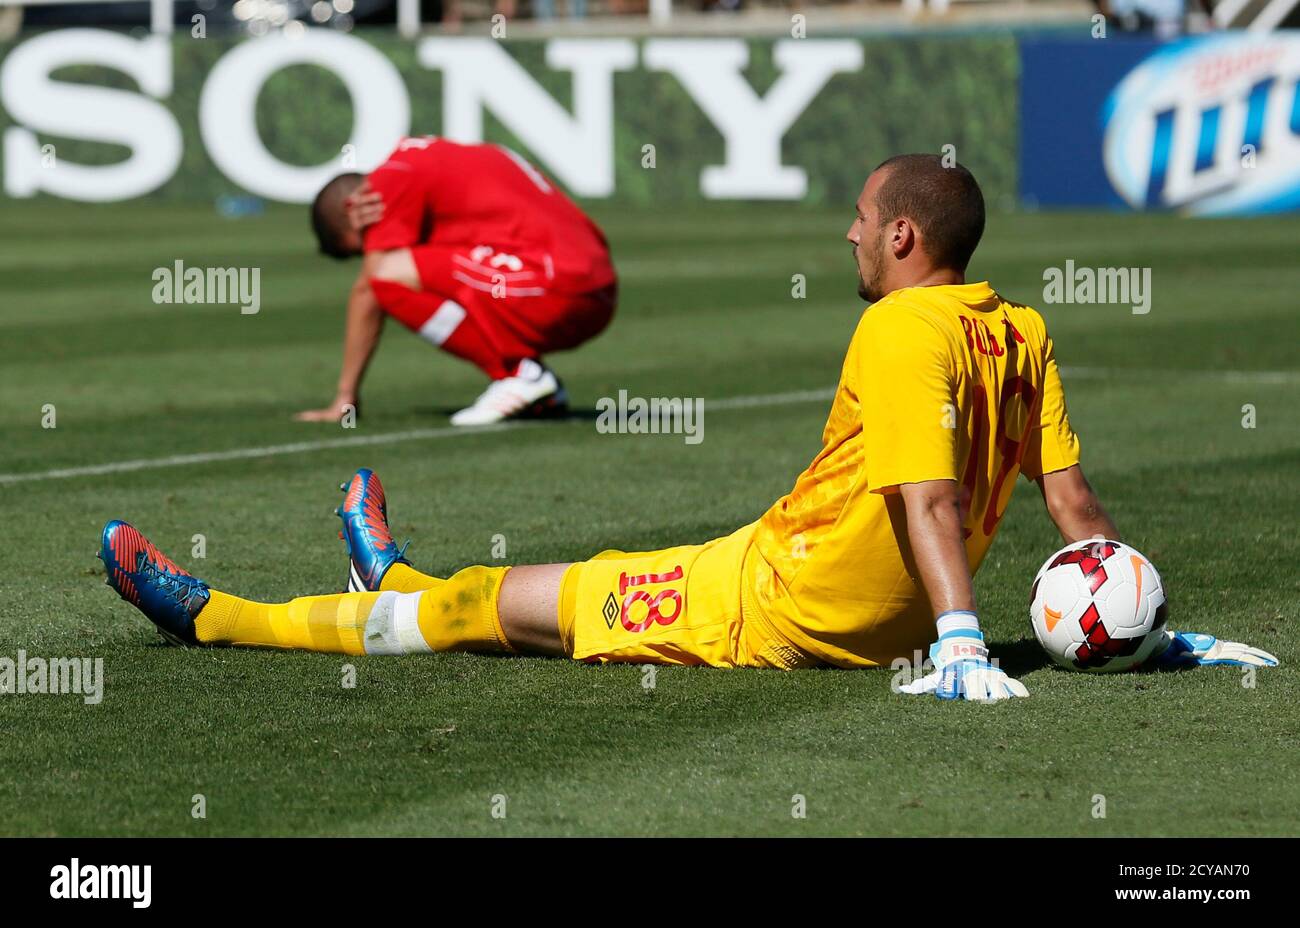 Goalkeper High Resolution Stock Photography and Images - Alamy